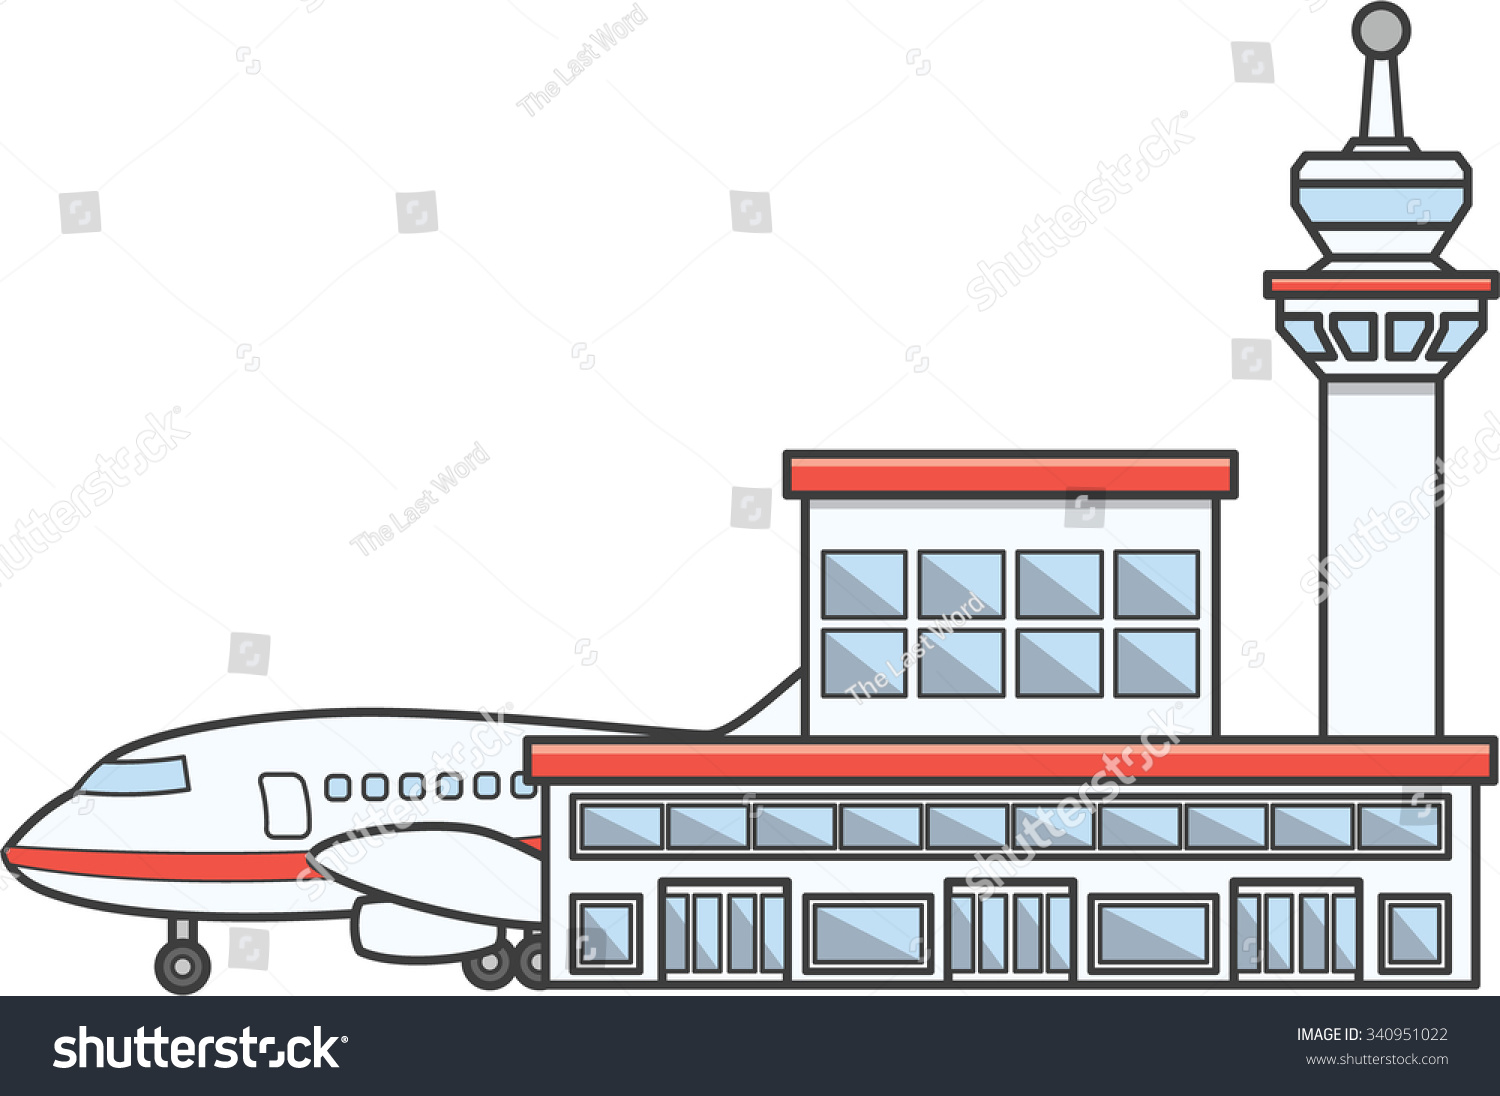 airport building clipart - photo #41